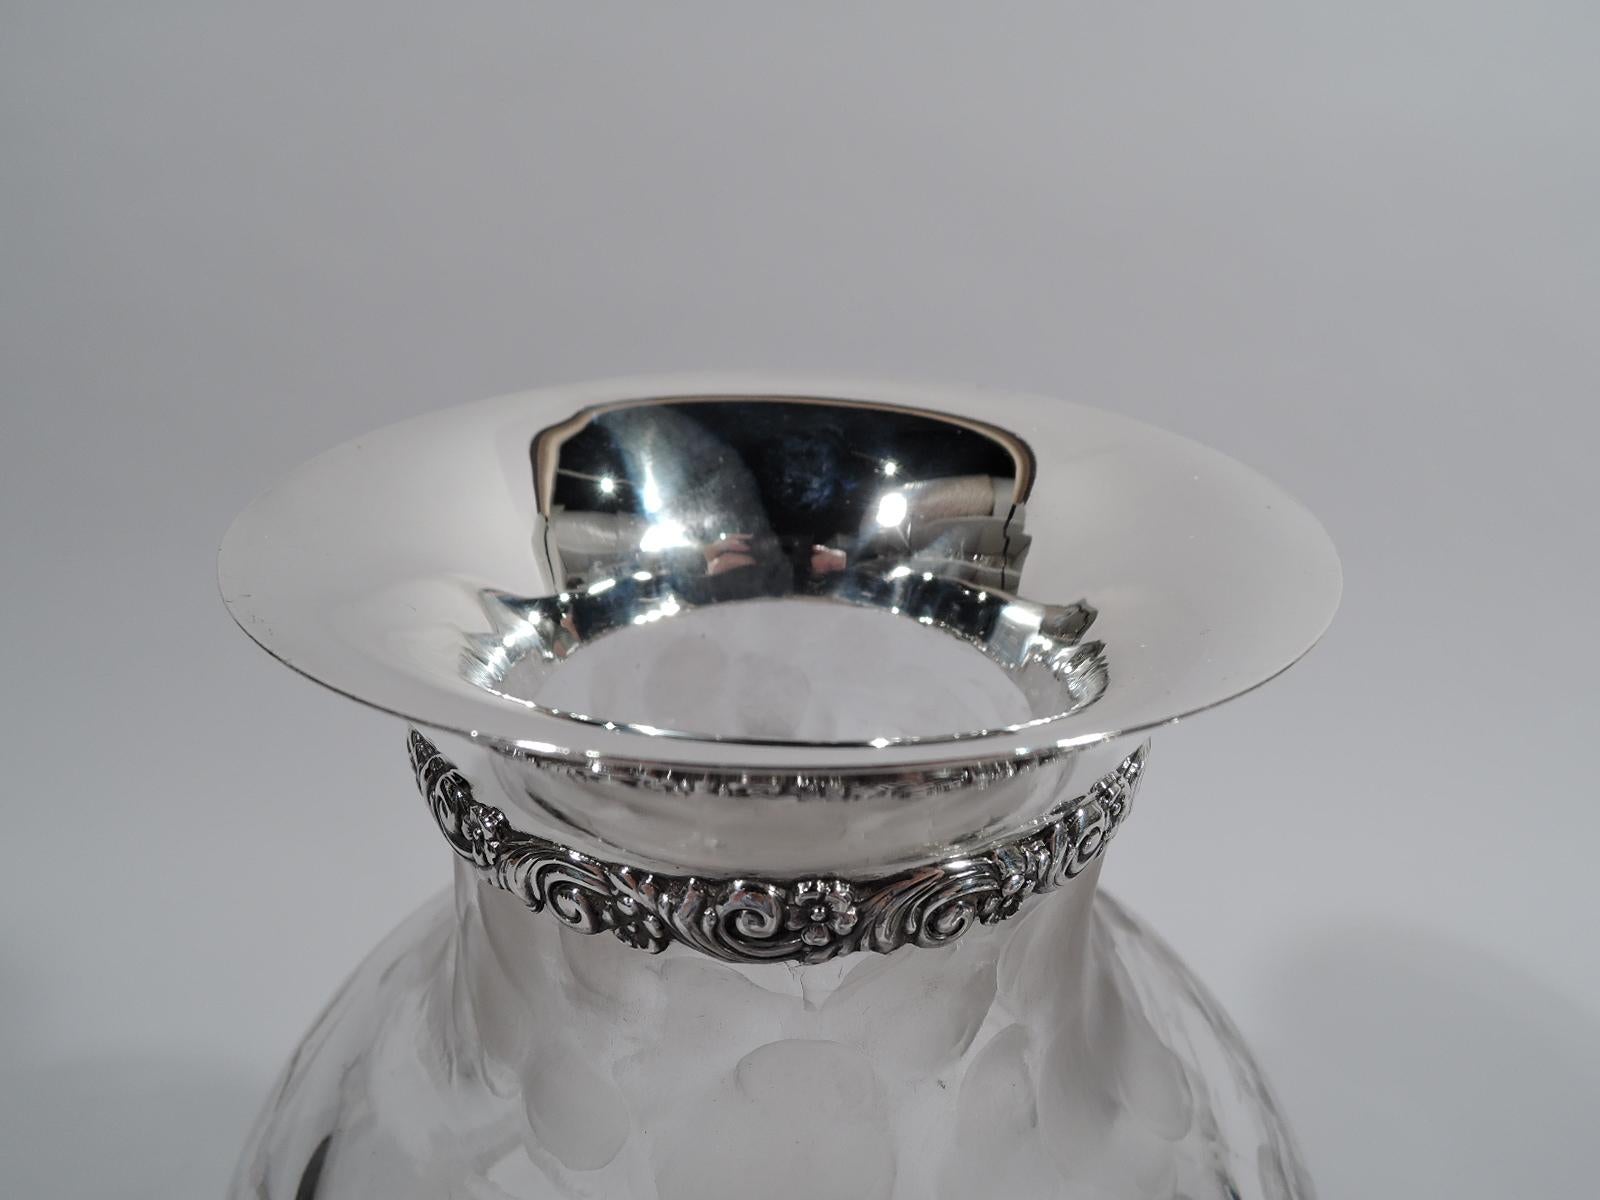 Turn-of-the-century glass vase with sterling silver collar. Made by Tiffany & Co. in New York. Clear with acid-etched birds soaring above a marshy landscape with cattails and grass. A crane spots a frog, which dives into the water in